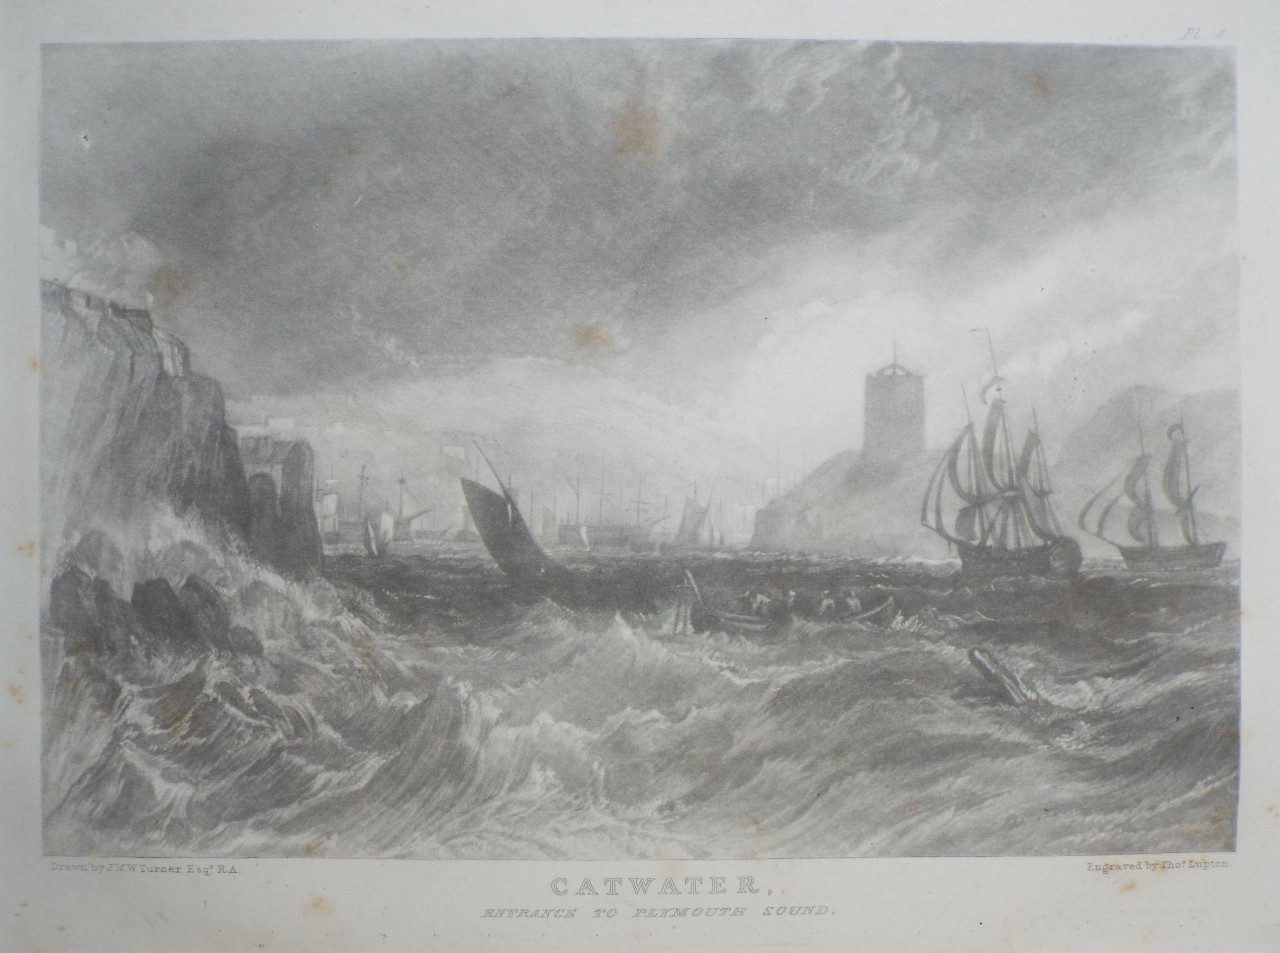 Steel mezzotint - Catwater, Entrance to Plymouth Sound. - Lupton